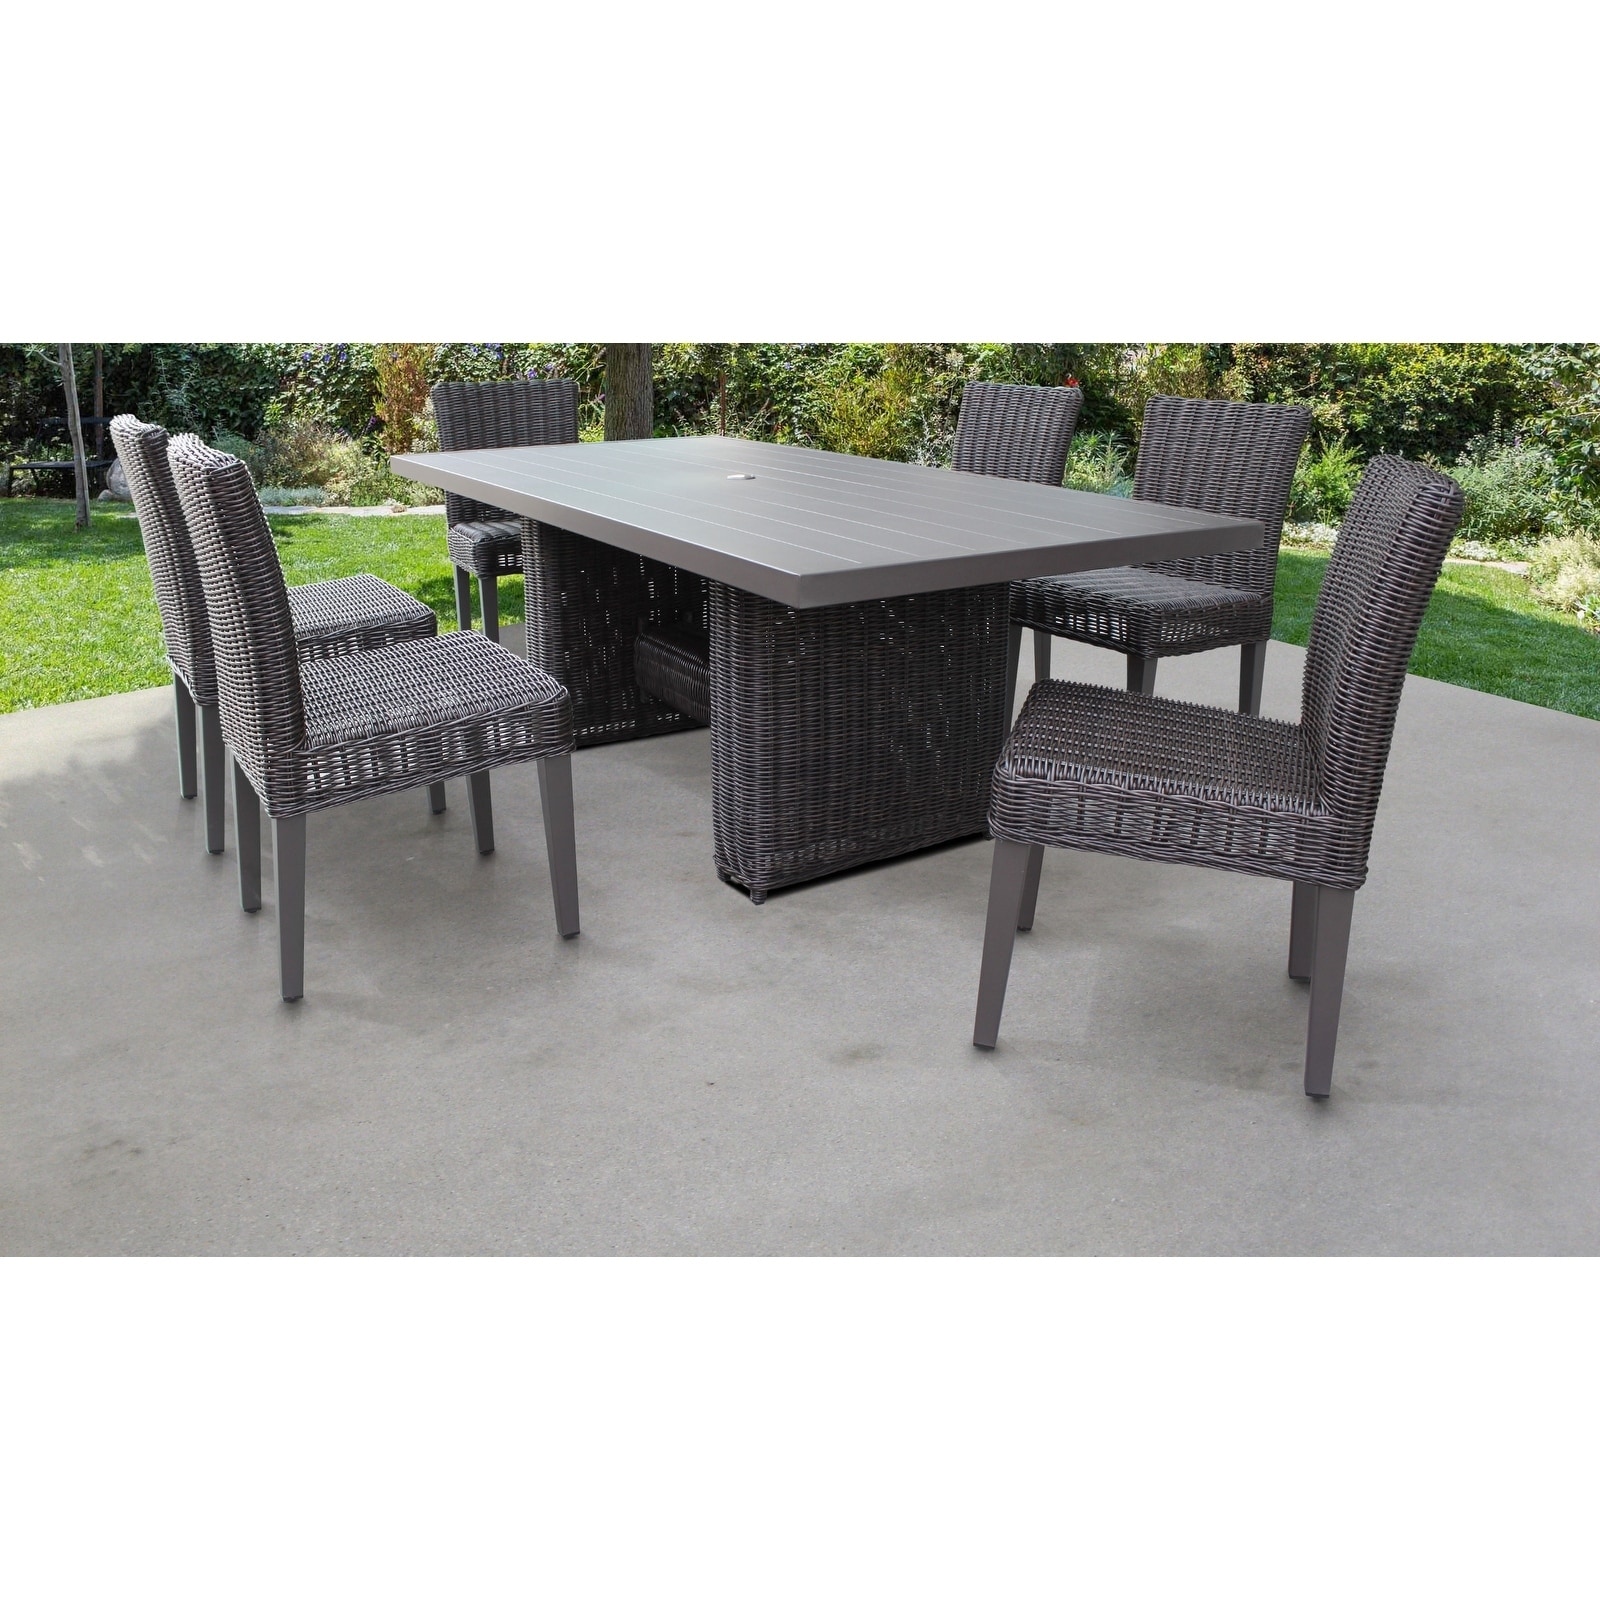 Venice Rectangular Outdoor Patio Dining Table With 6 Armless Chairs